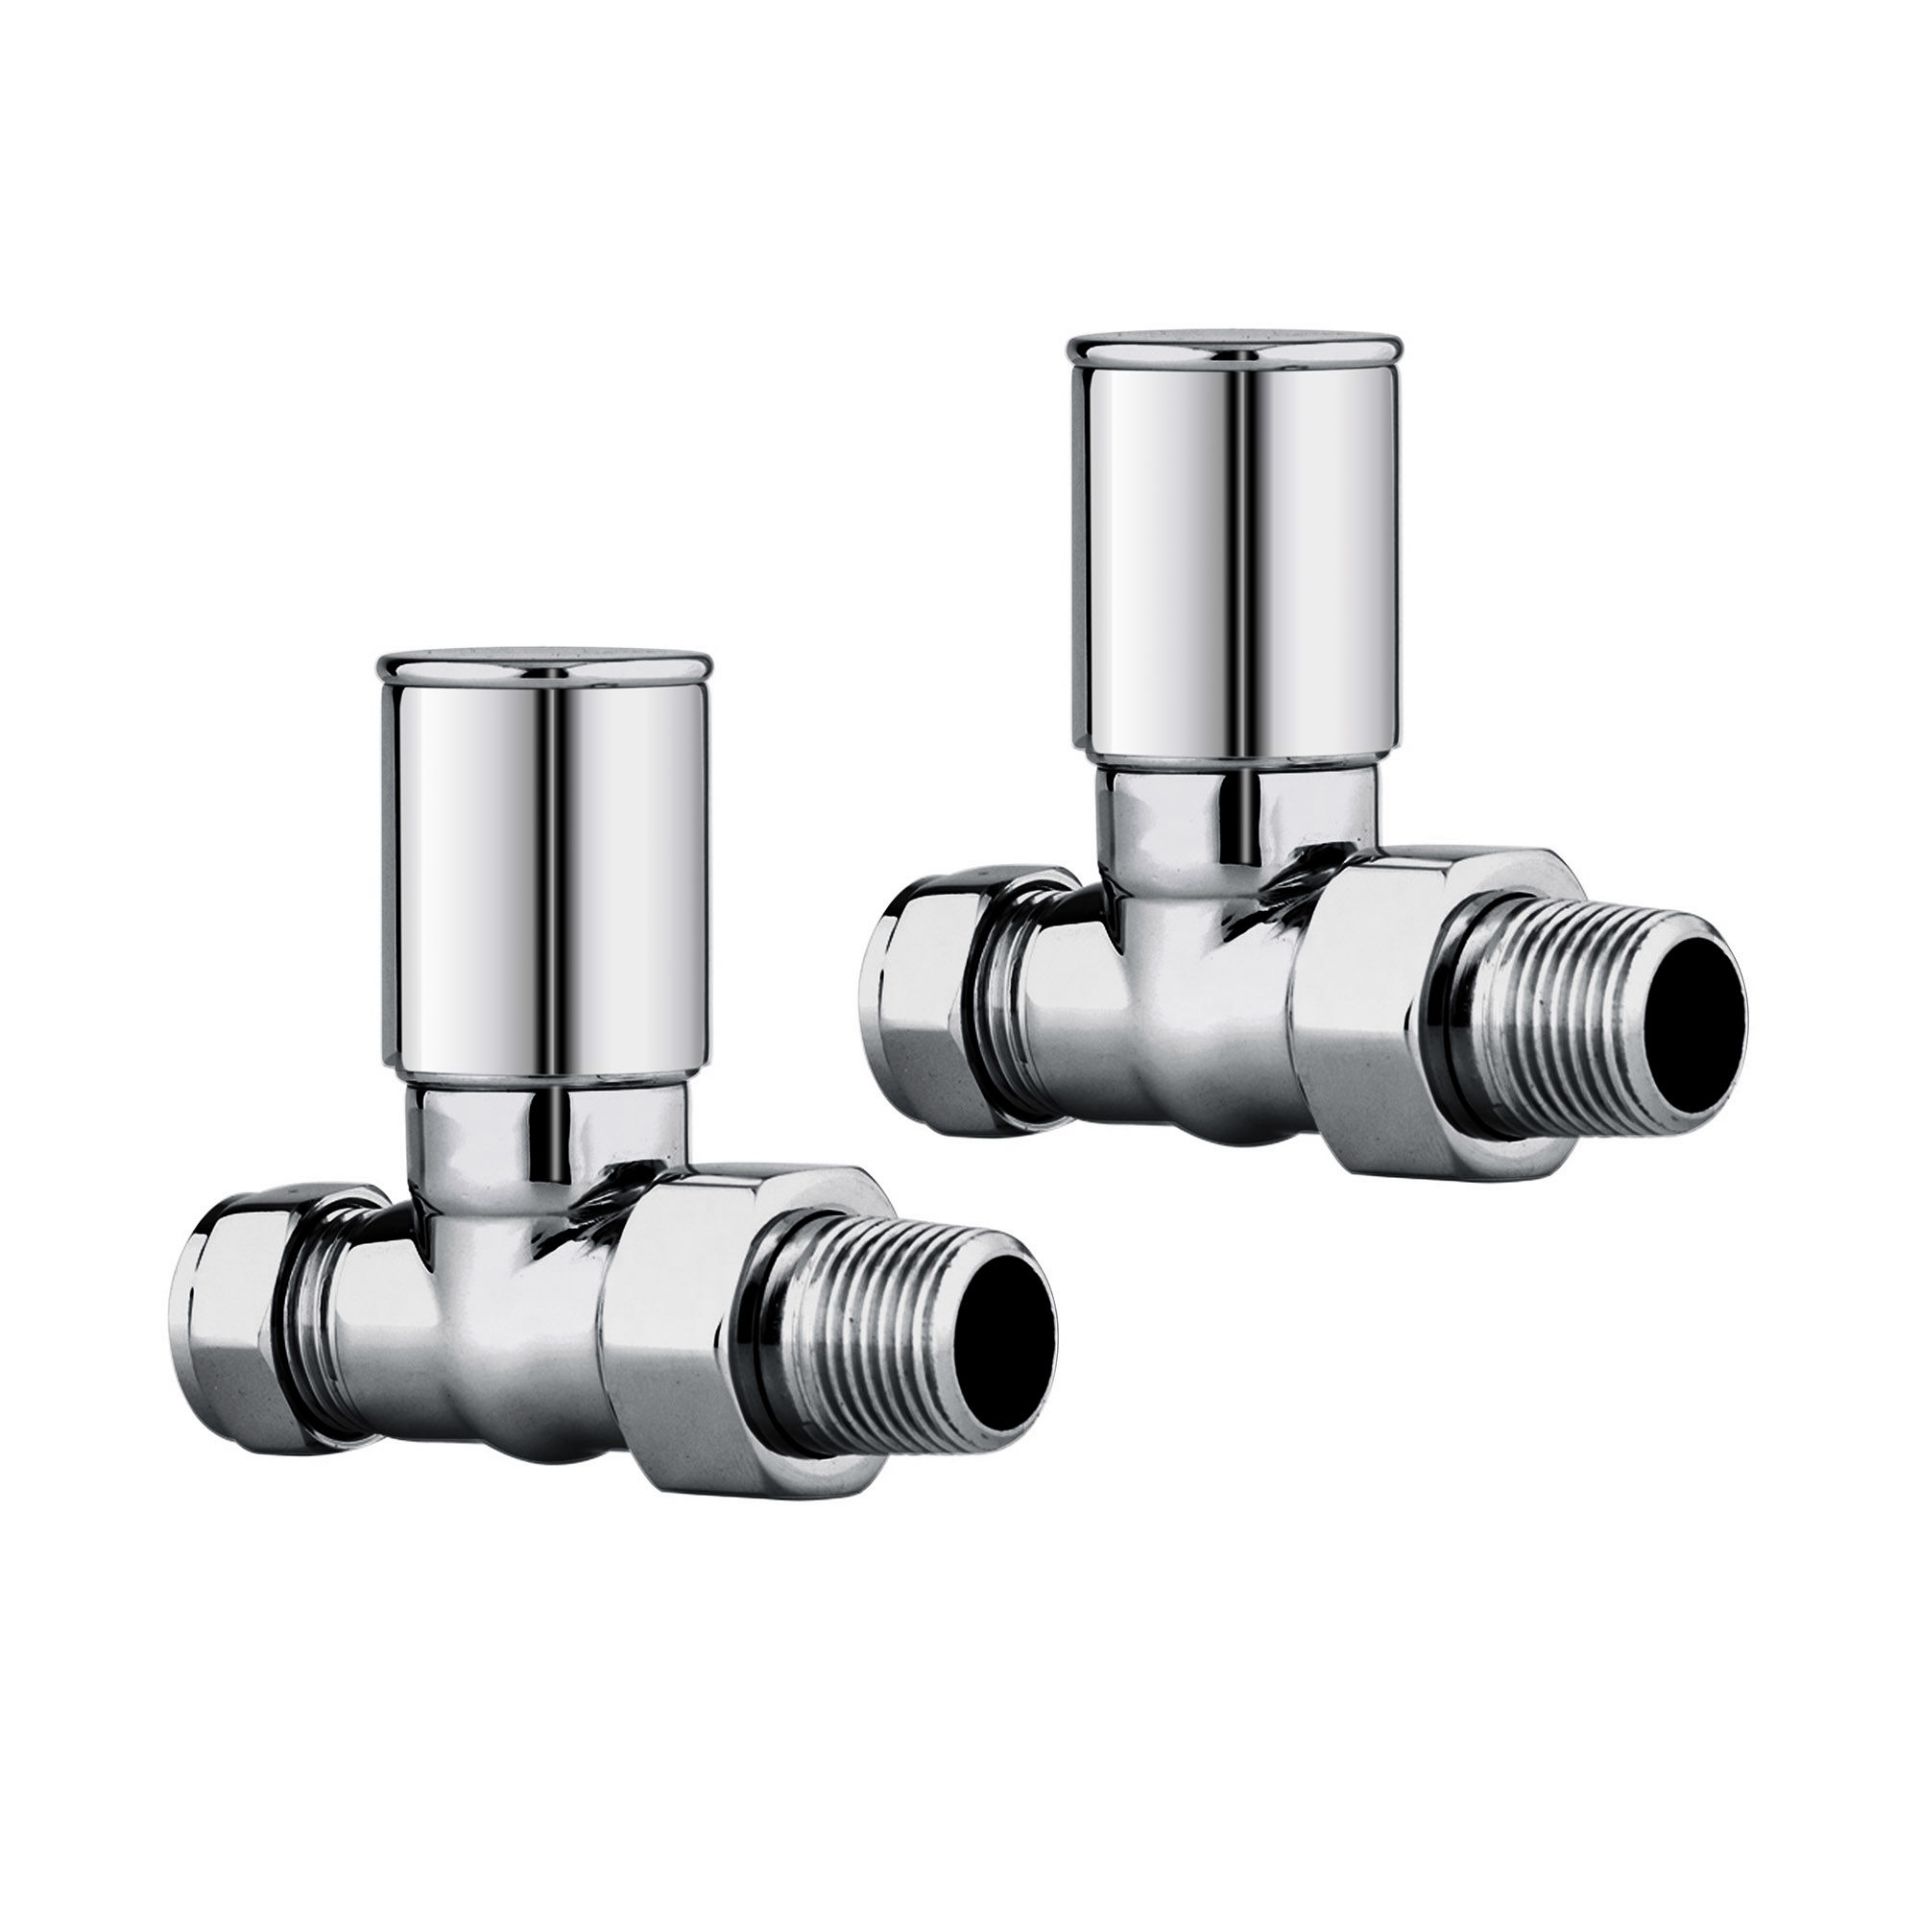 (NK18) 15mm Standard Connection Straight Radiator Valves - Heavy Duty Polished Chrome Plated Brass - Image 2 of 2